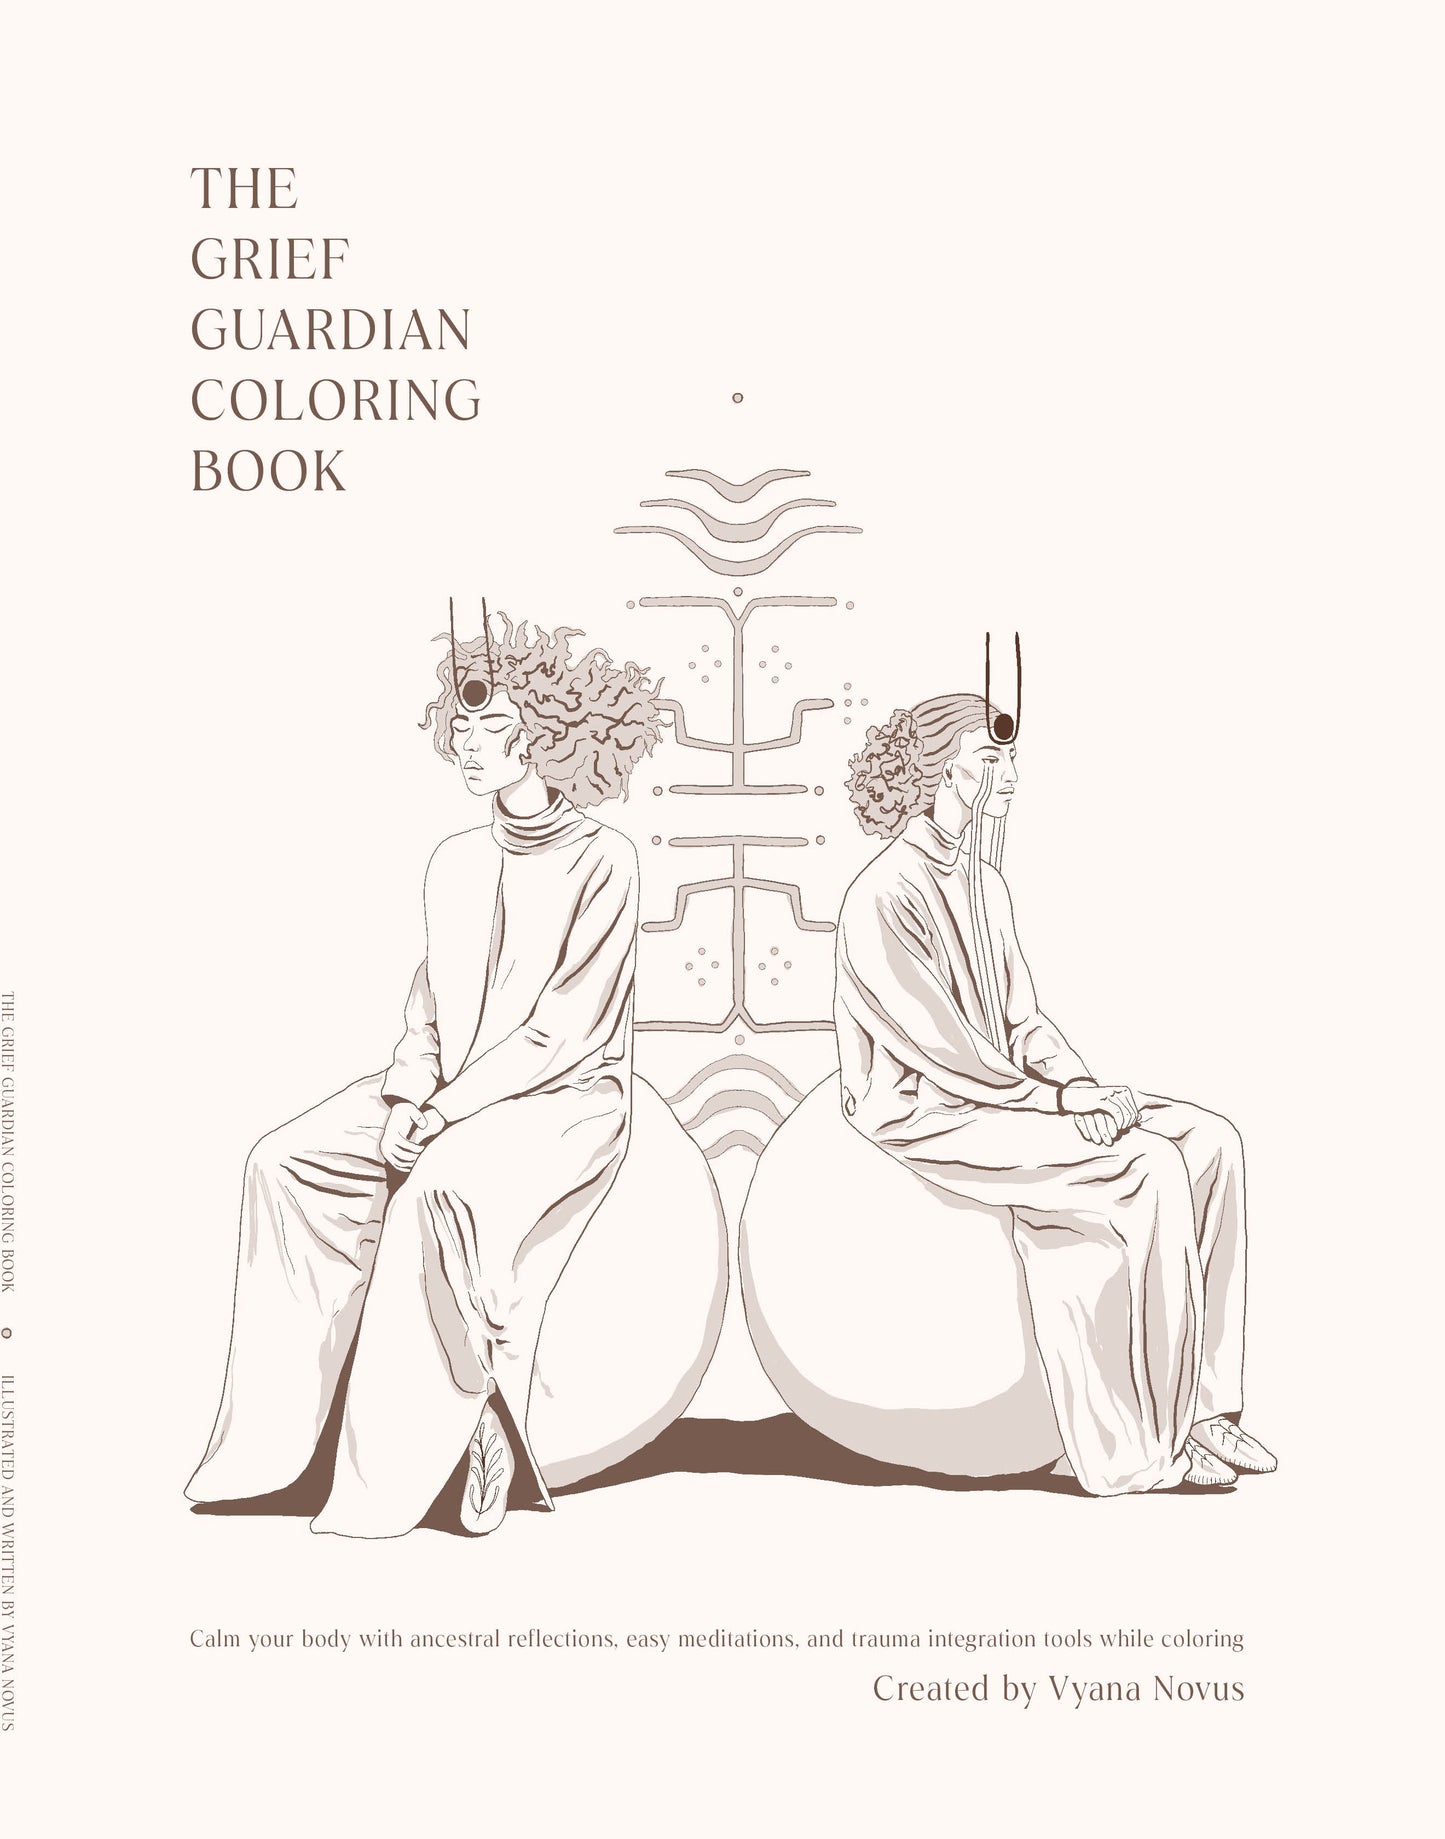 The Grief Guardian Coloring Book